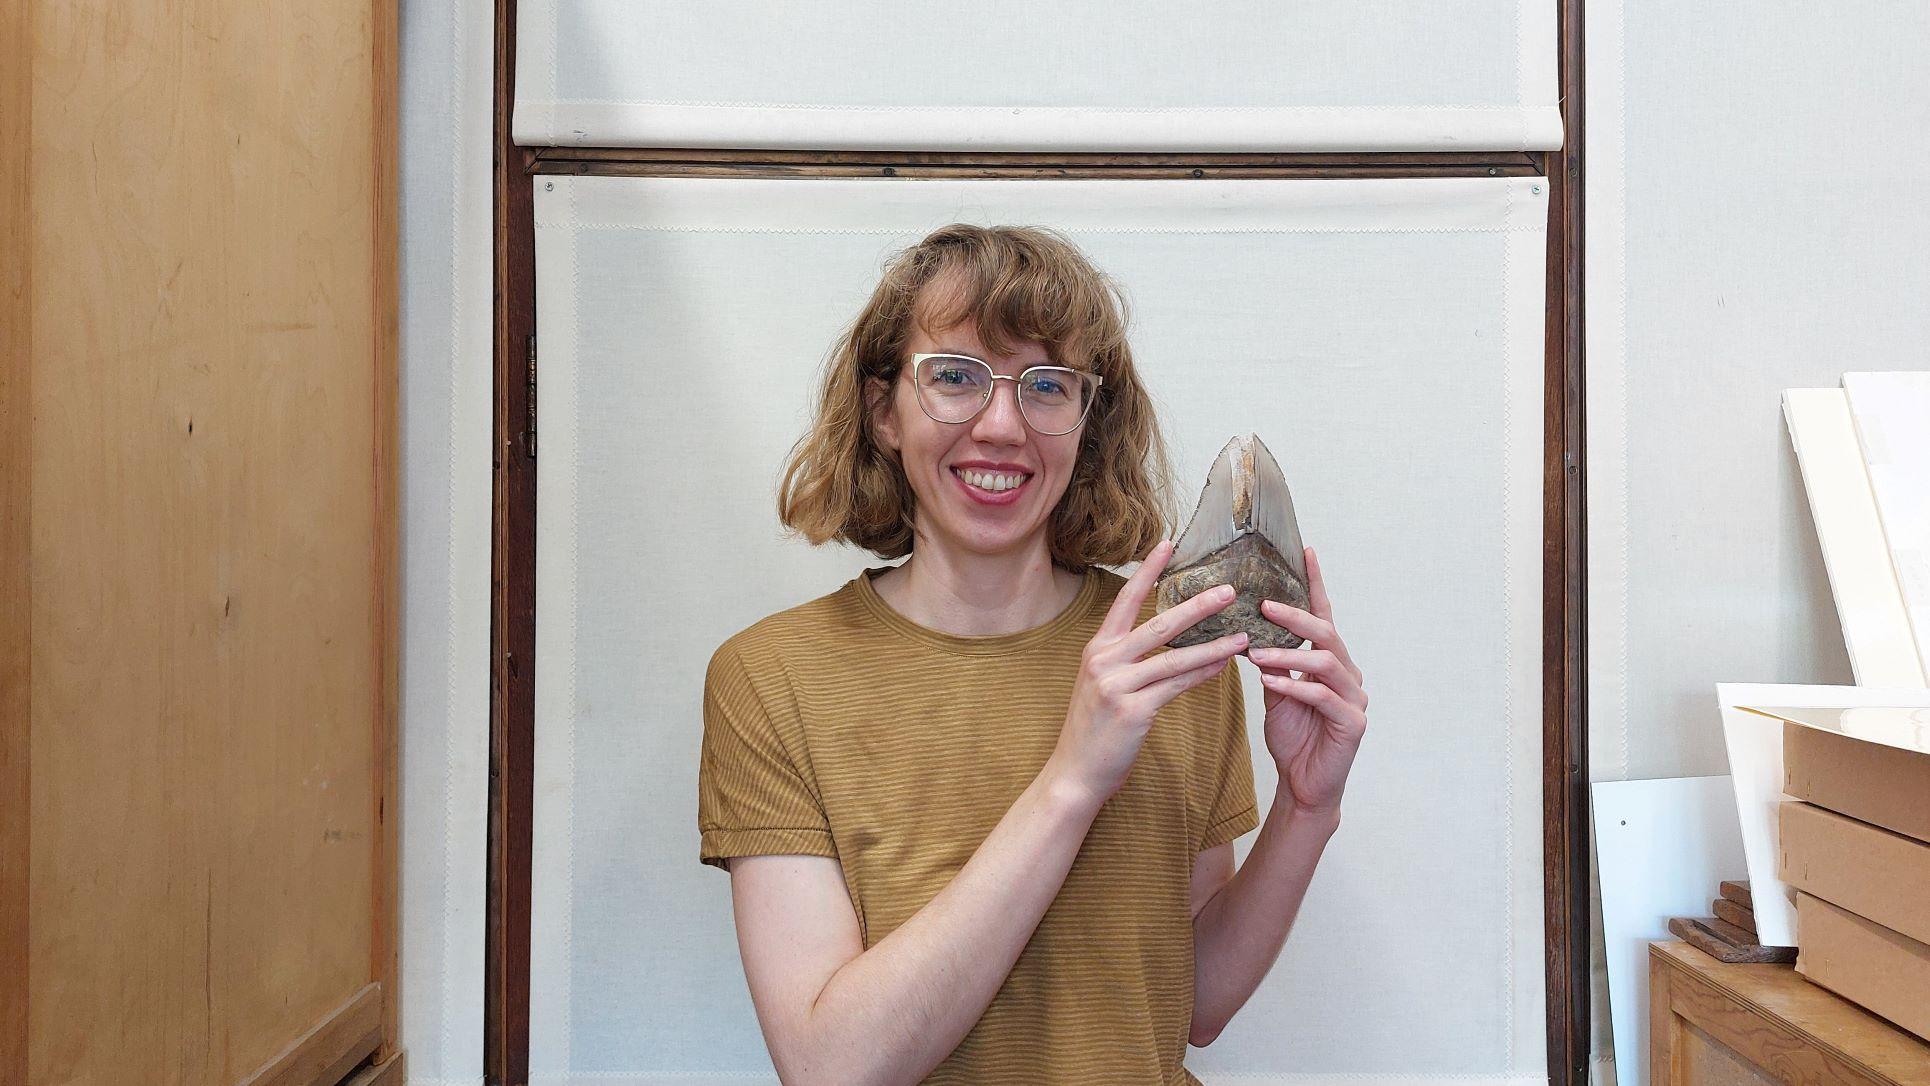 Photo of woman smiling holding giant shark tooth